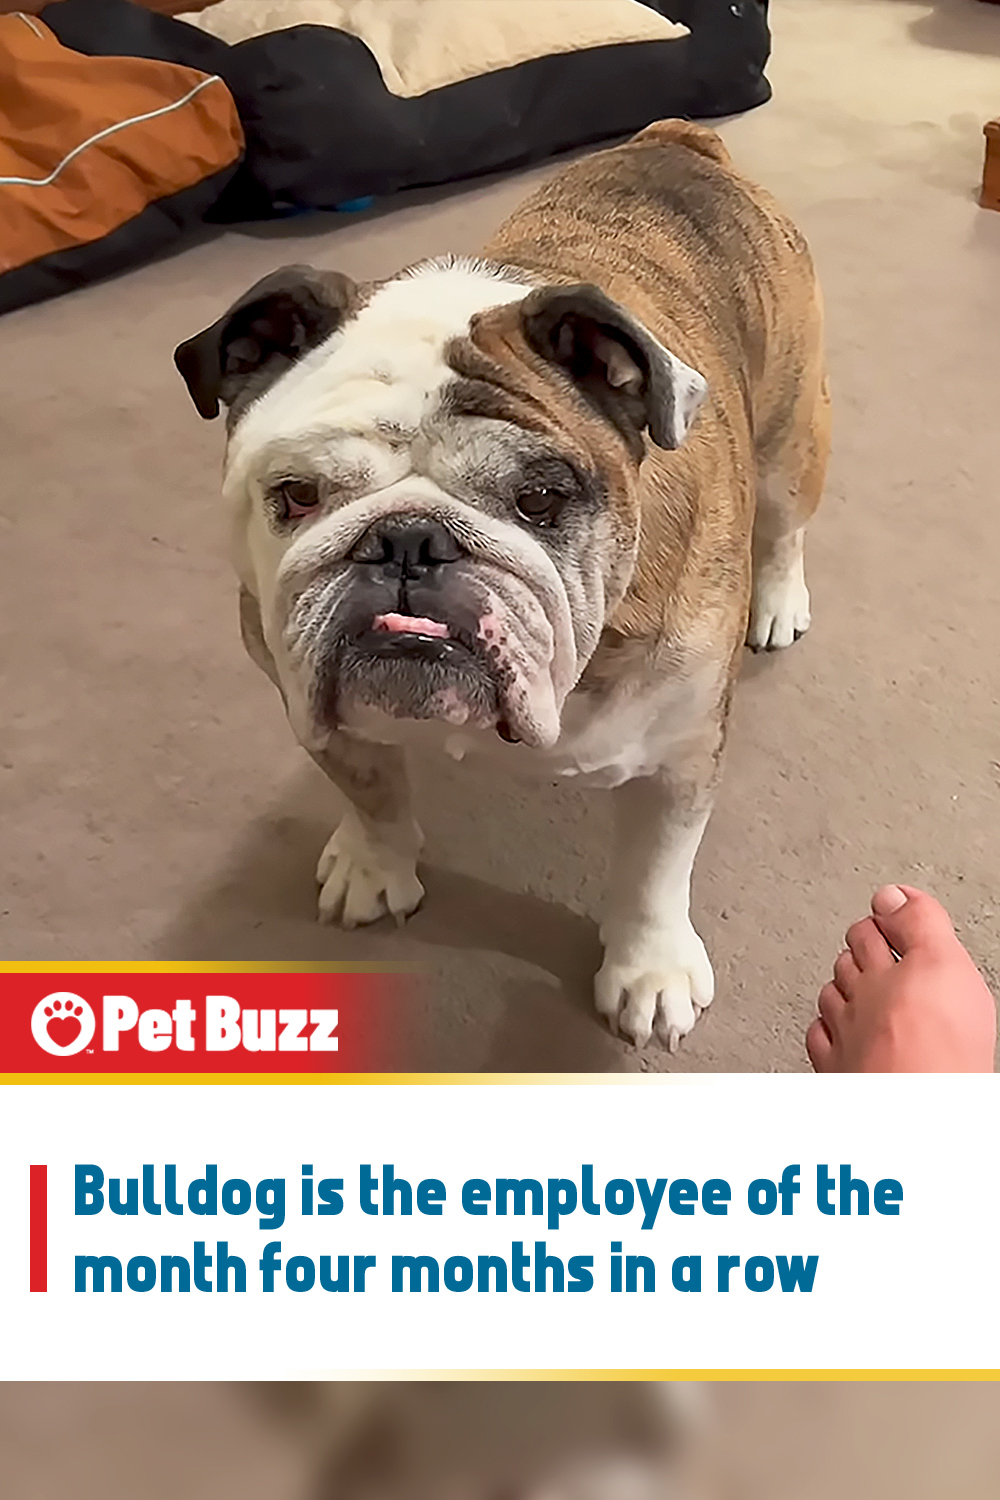 Bulldog is the employee of the month four months in a row